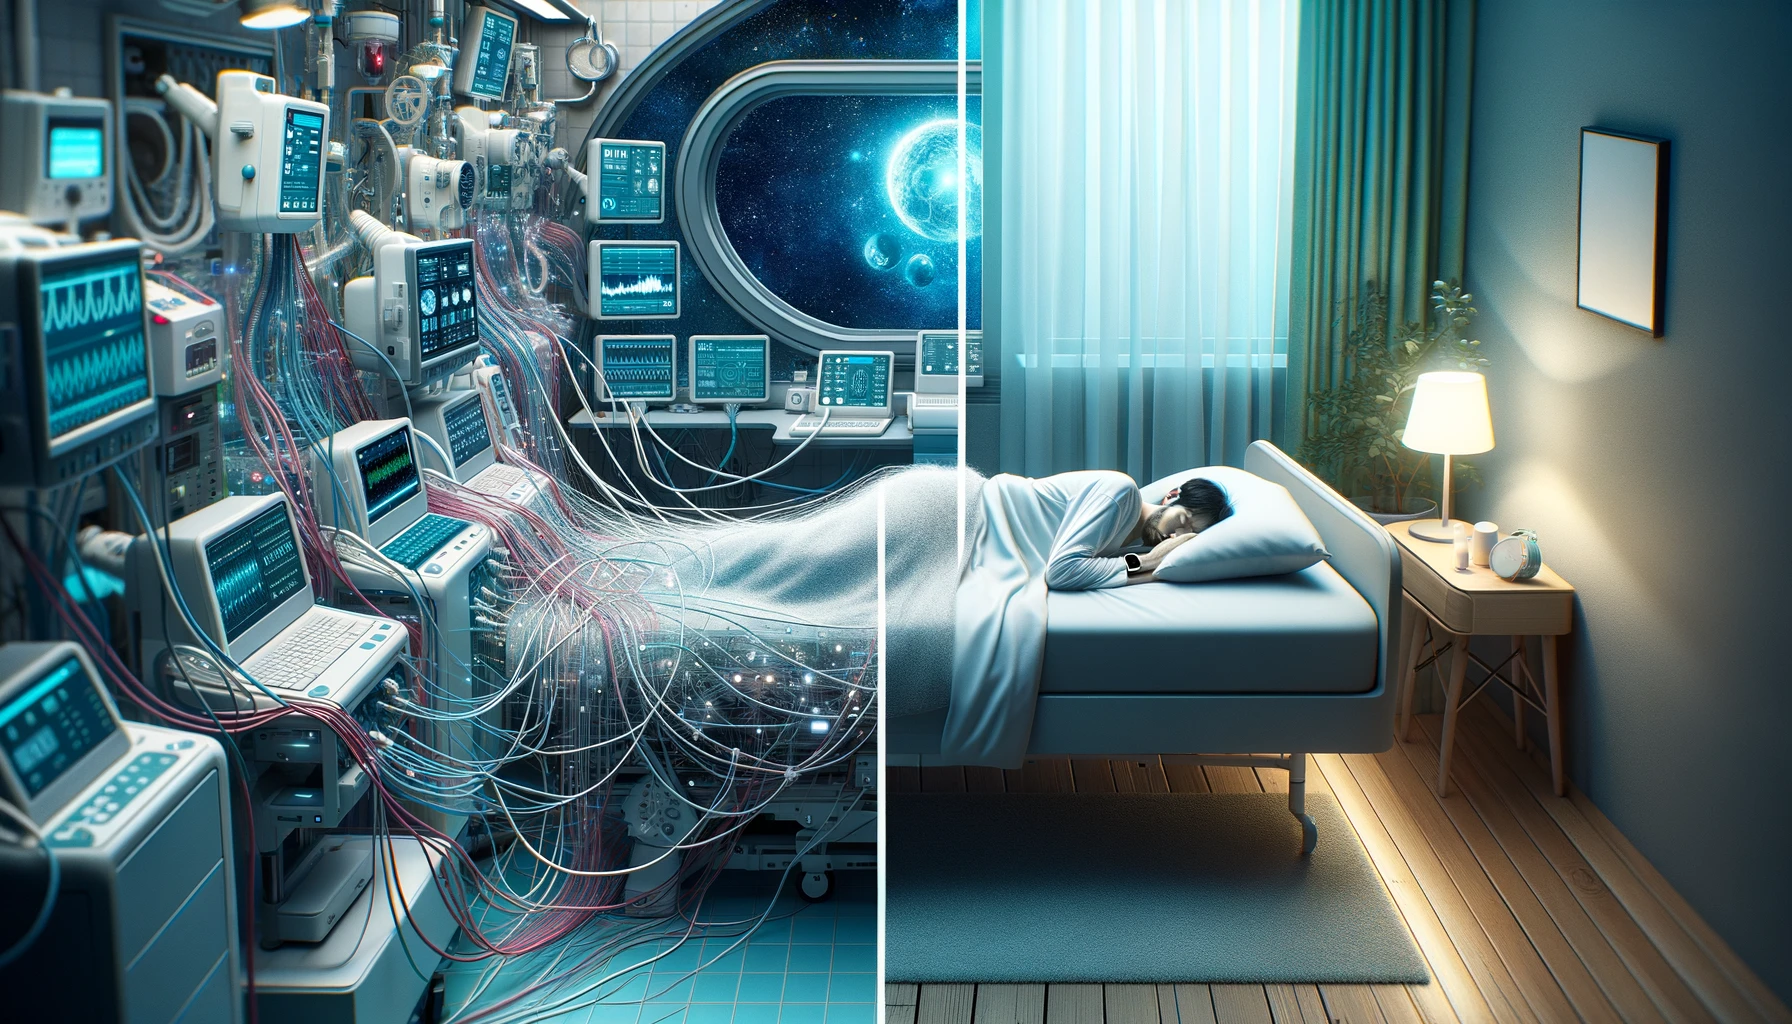 Split image illustration. On the left, a detailed medical room is vividly depicted with a patient asleep, enveloped by advanced medical machinery. Wires connect them to sensors and screens that display sleep metrics. The environment feels intricate and sterile. Transitioning to the right, a complete contrast emerges. A calming bedroom scene unfolds, with the same patient resting peacefully. A smart wristband is clearly visible on their wrist, capturing essential sleep data. The soft lighting, comfortable pillows, and serene ambiance emphasize the wristband's non-intrusive and efficient monitoring capability.